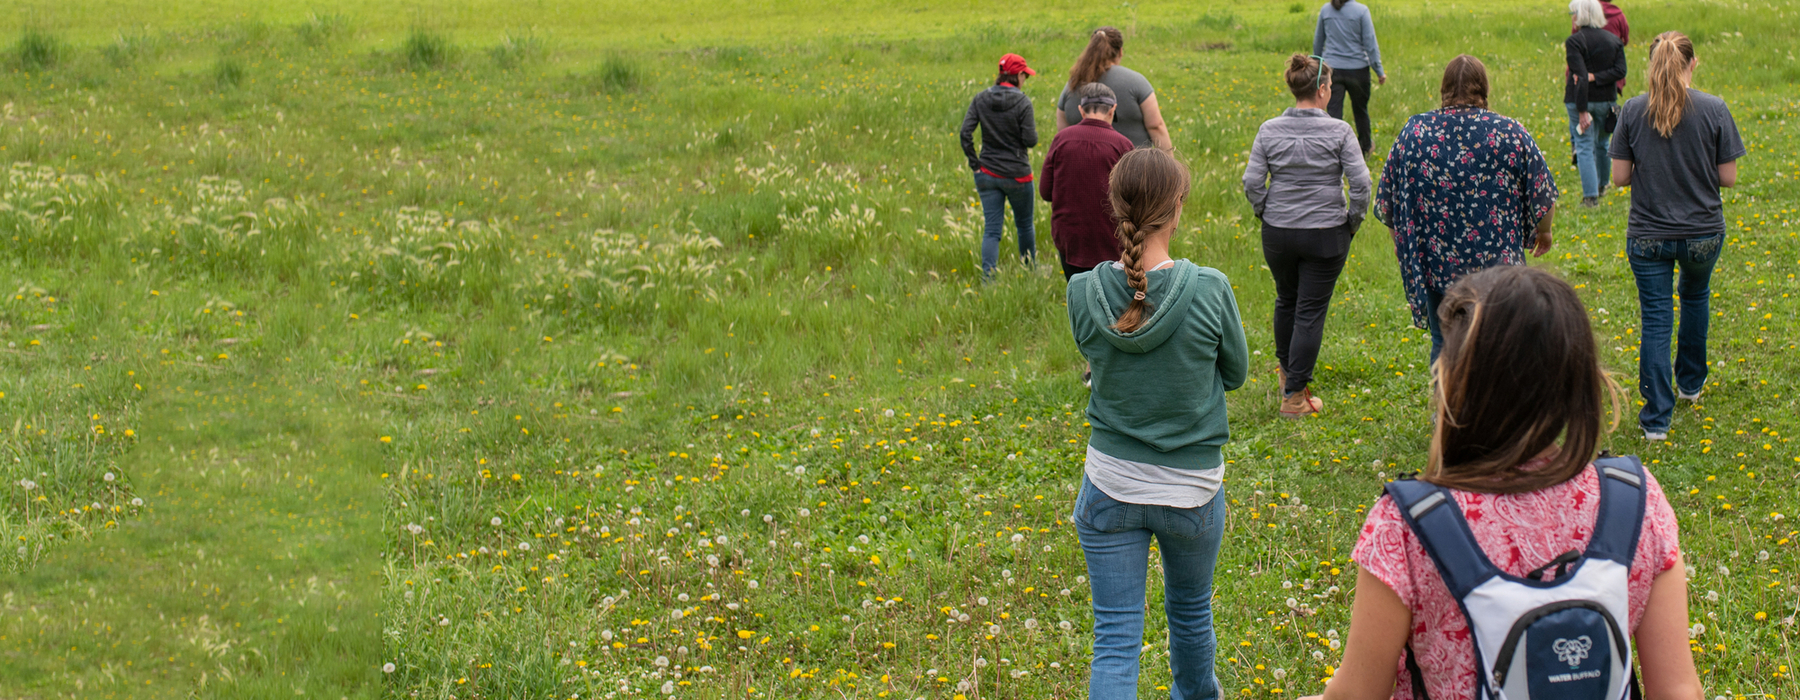 Participants in a field at a workshop